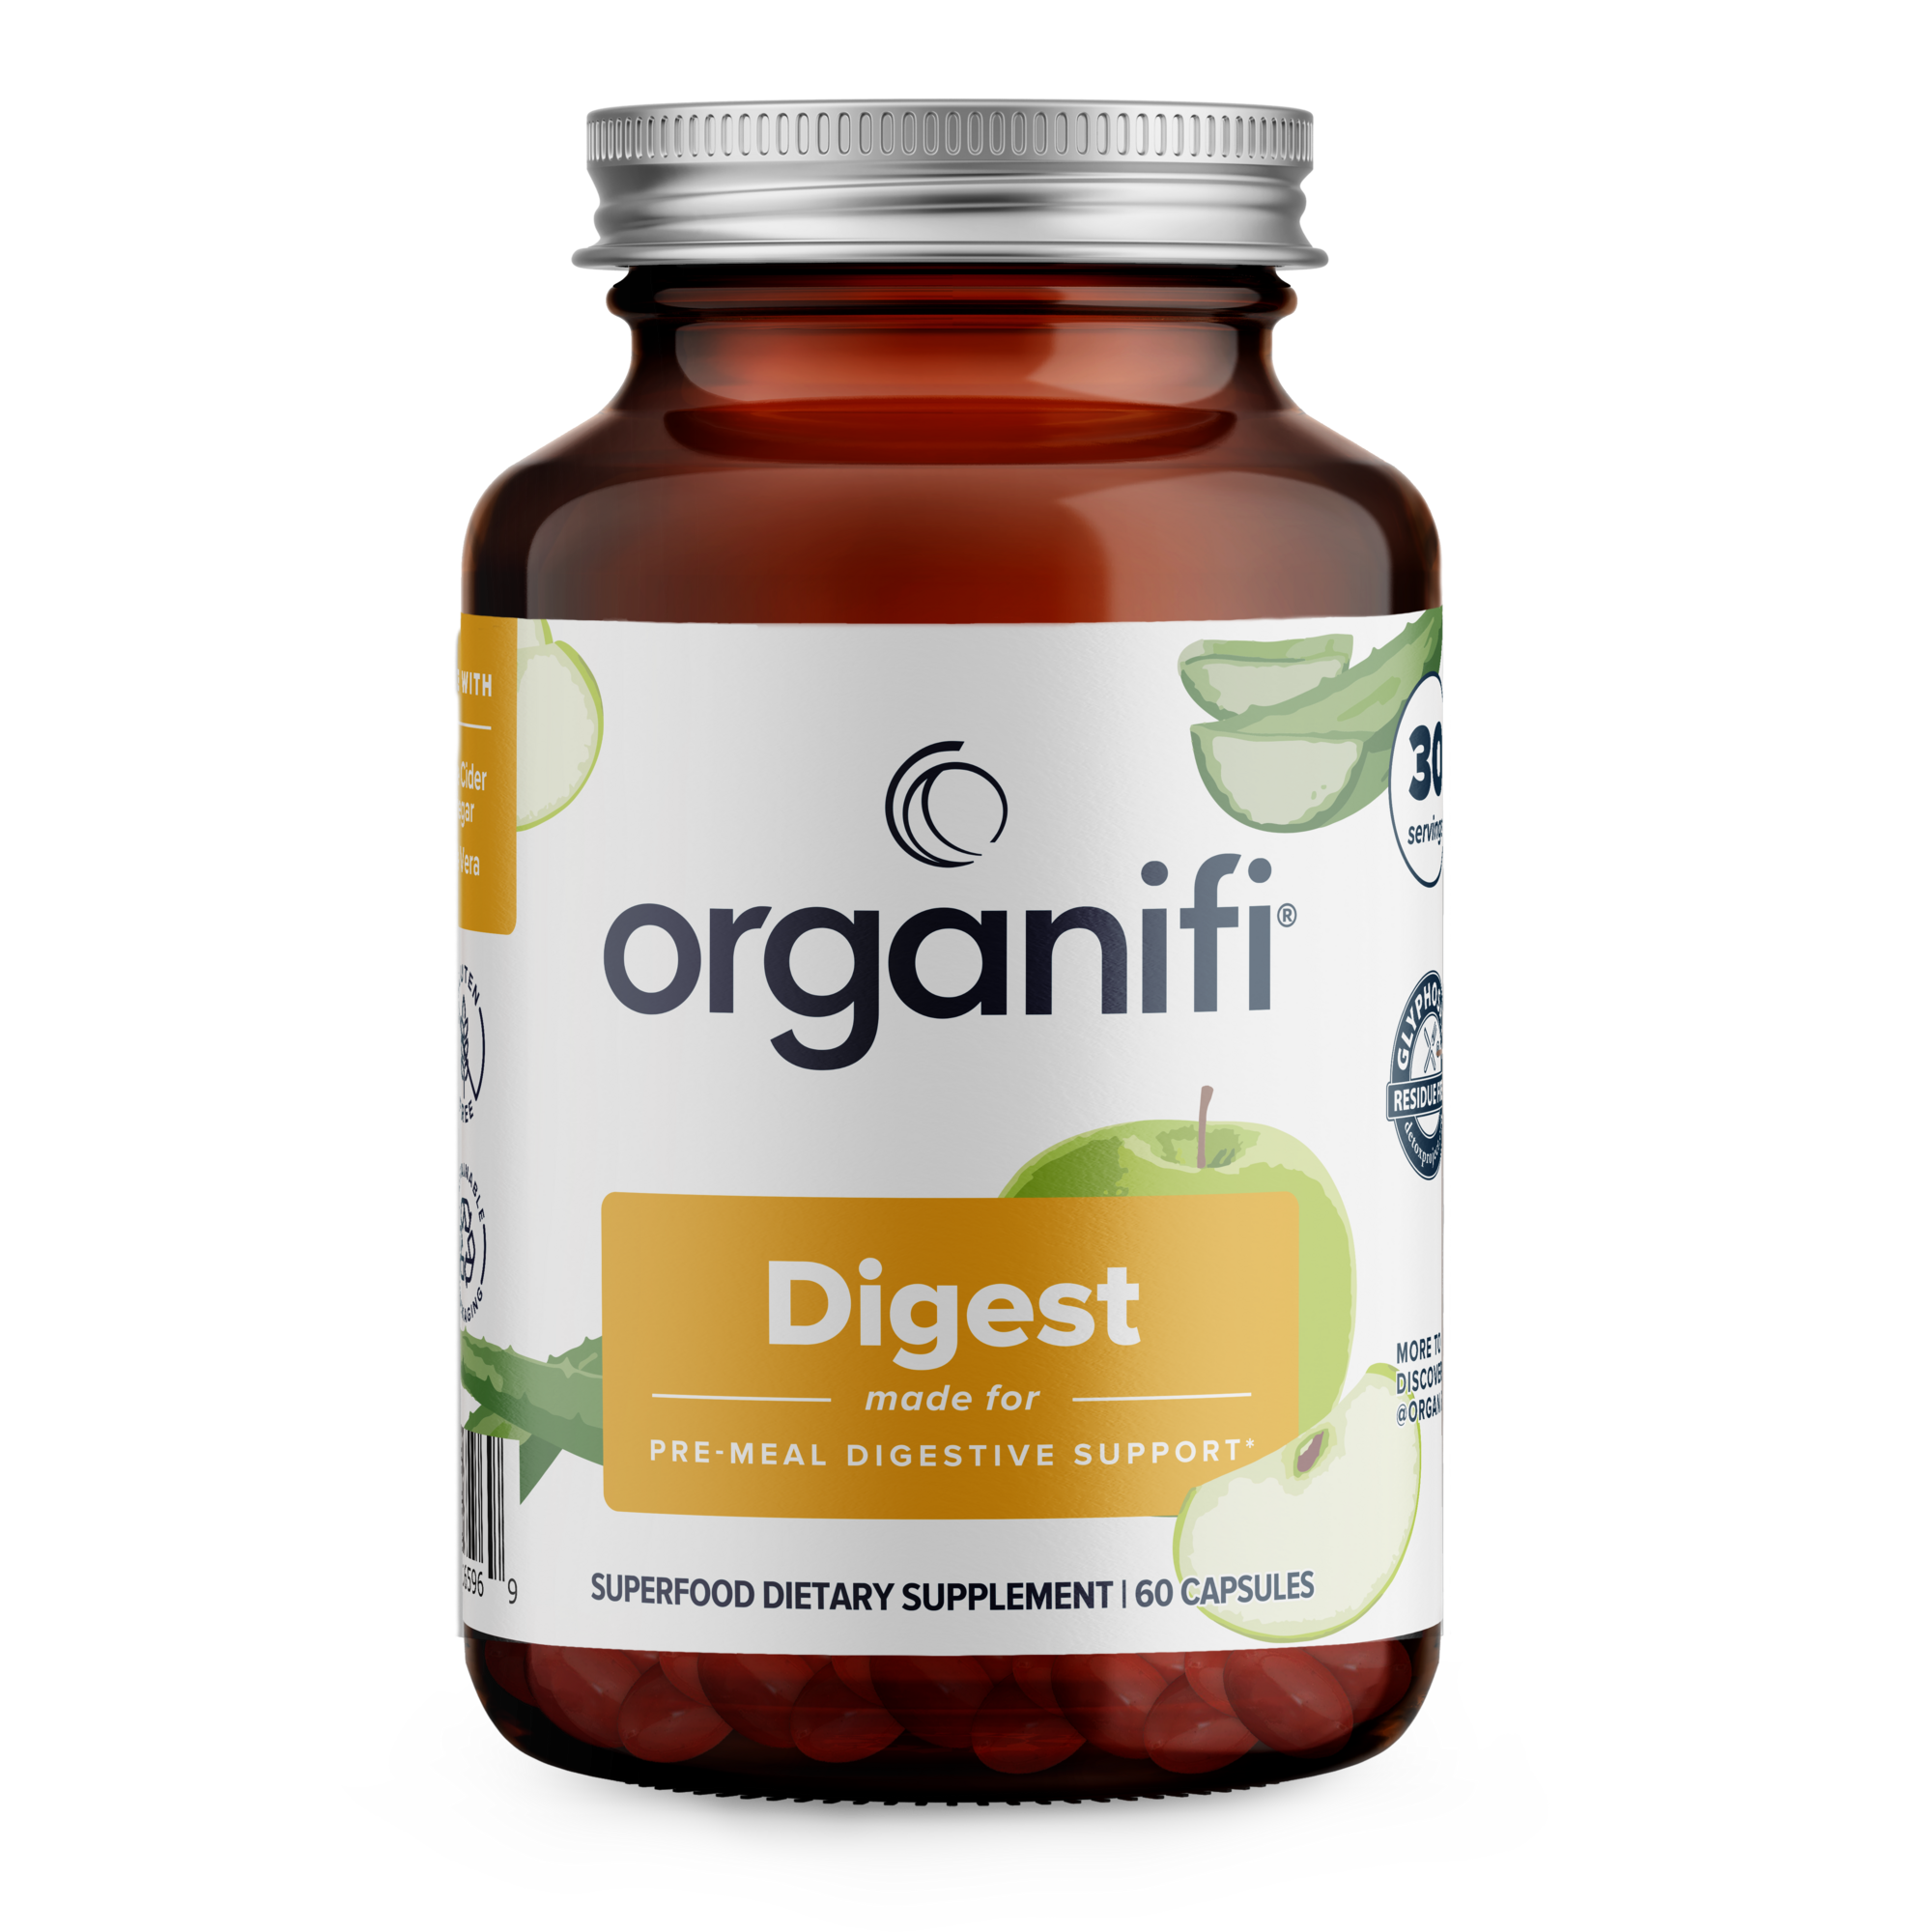 Organifi Digest - Ultimate Pre-Meal Digestion Support Capsule with Aloe  Vera, ACV & Digestive Enzymes – organifi